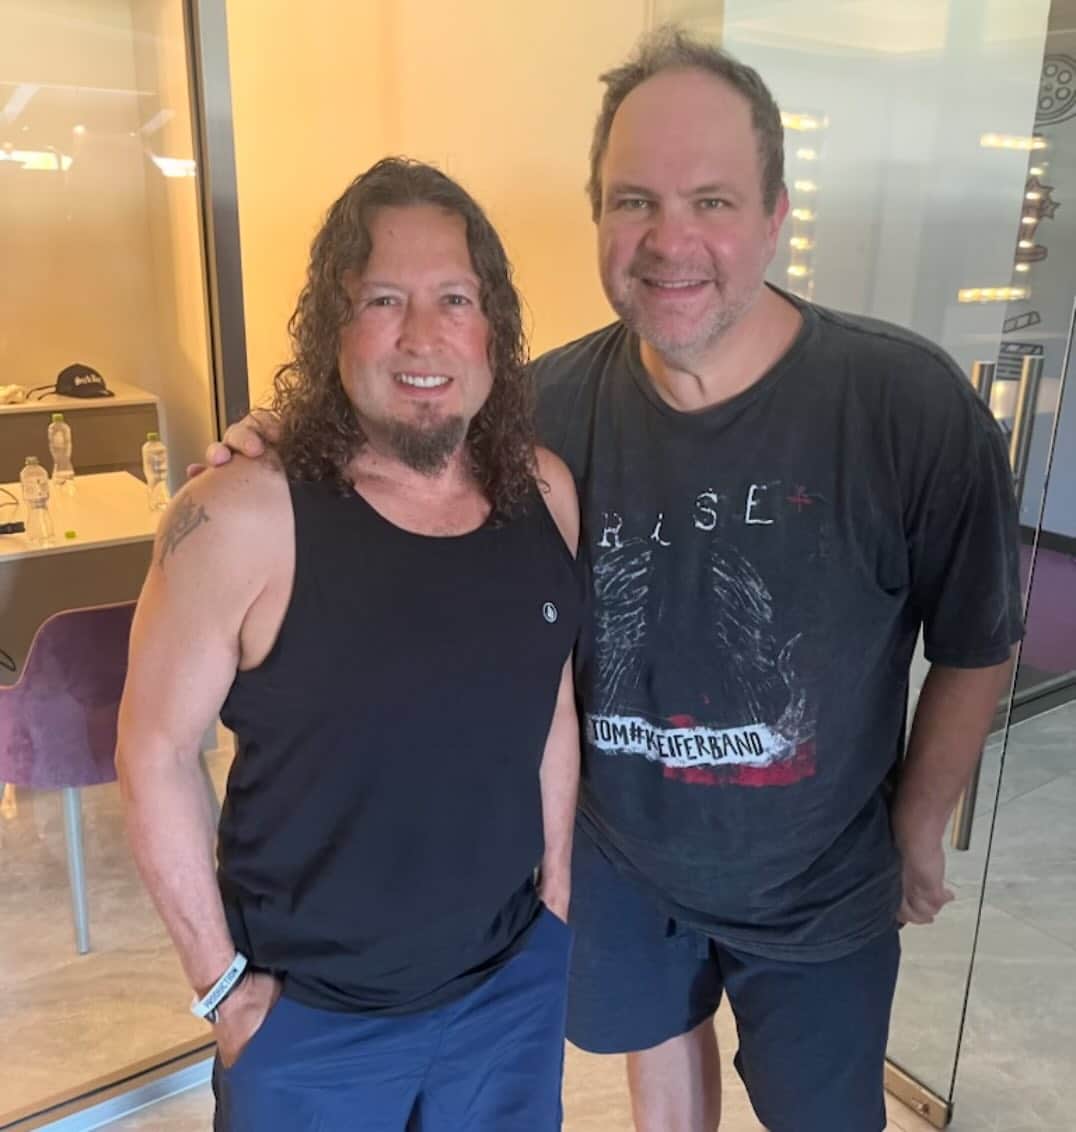 Queensrycheのインスタグラム：「Thanks go out to @eddietrunk for his interview with Whip the other day for #trunknation from Cancun @thesands.rocks. If you missed the interview it's now up on the siriusxm app and at trunknationsxm. Thanks to @blabbermouth.net_official for reporting: https://blabbermouth.net/news/queensryches-michael-wilton-says-his-solo-album-is-about-halfway-done  #queensryche #cancun #mexico #interview #michaelwilton #whip #eddietrunk #80sintthesand #soloalbum」